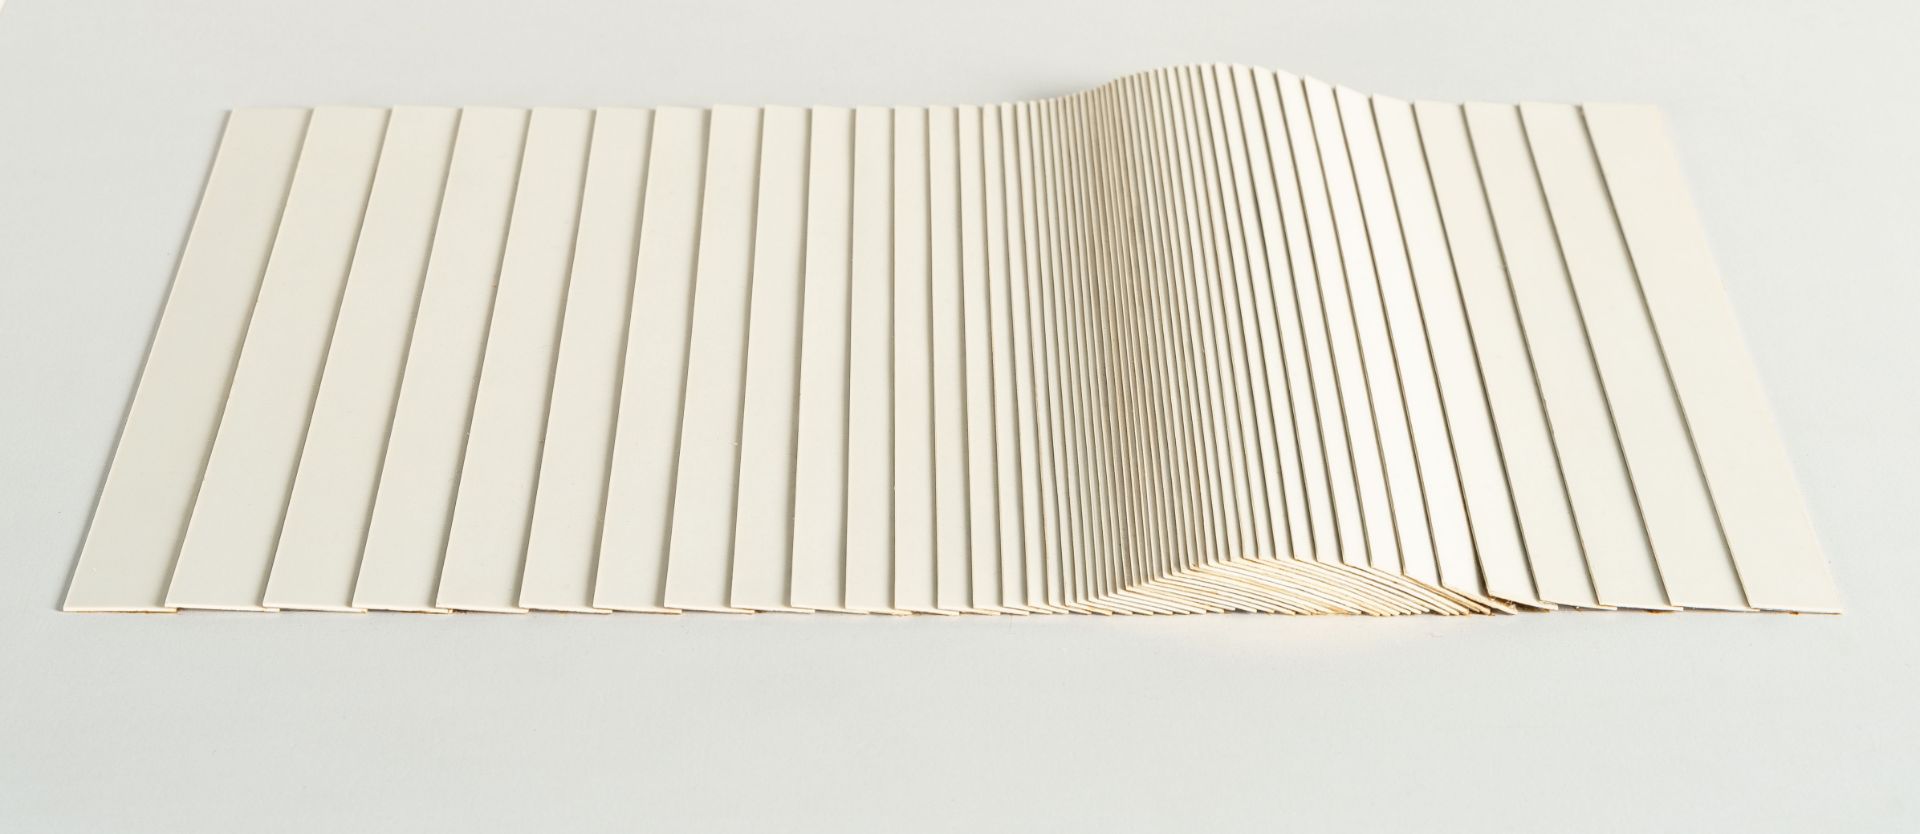 Leo Erb, “No. 27” (Horizontal slat structure).Mixed media with wood and lacquer, laid down on panel. - Image 4 of 4